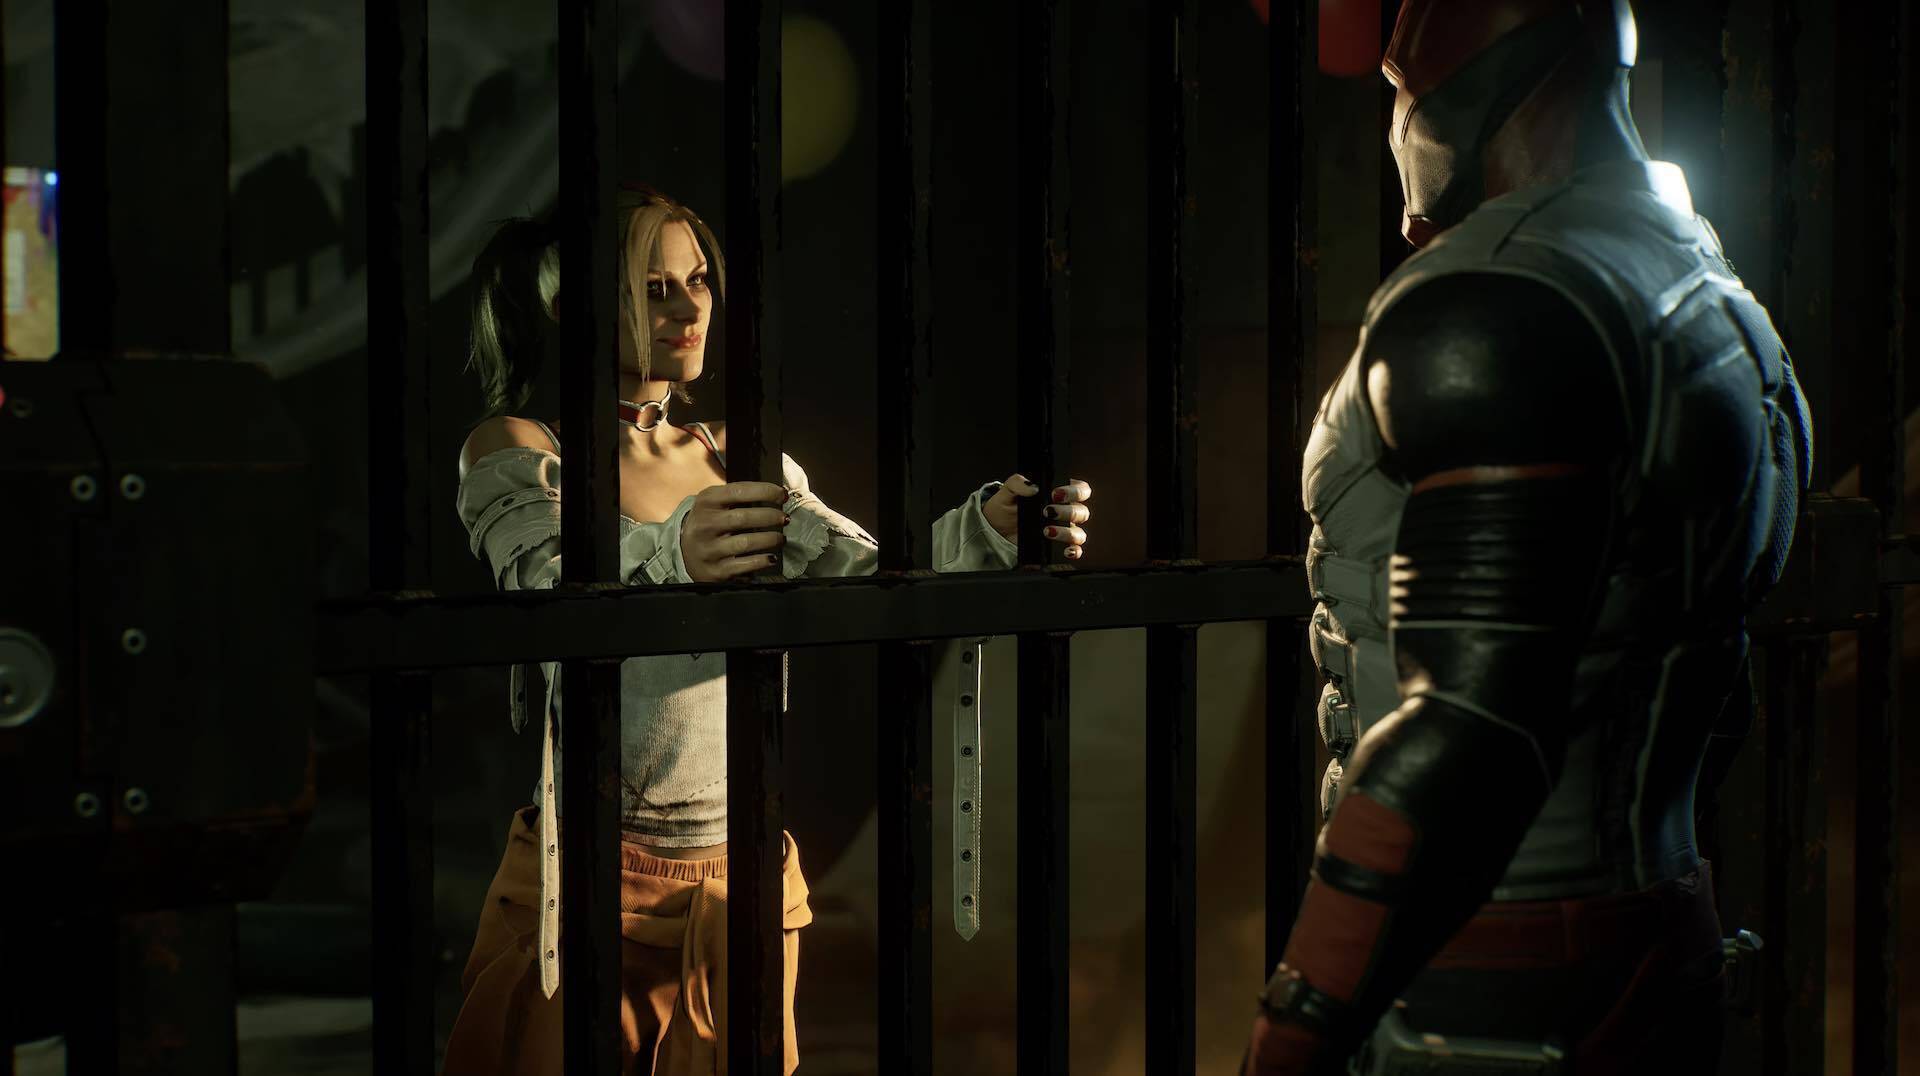 Gotham Knights Review: Shadow of the Bat